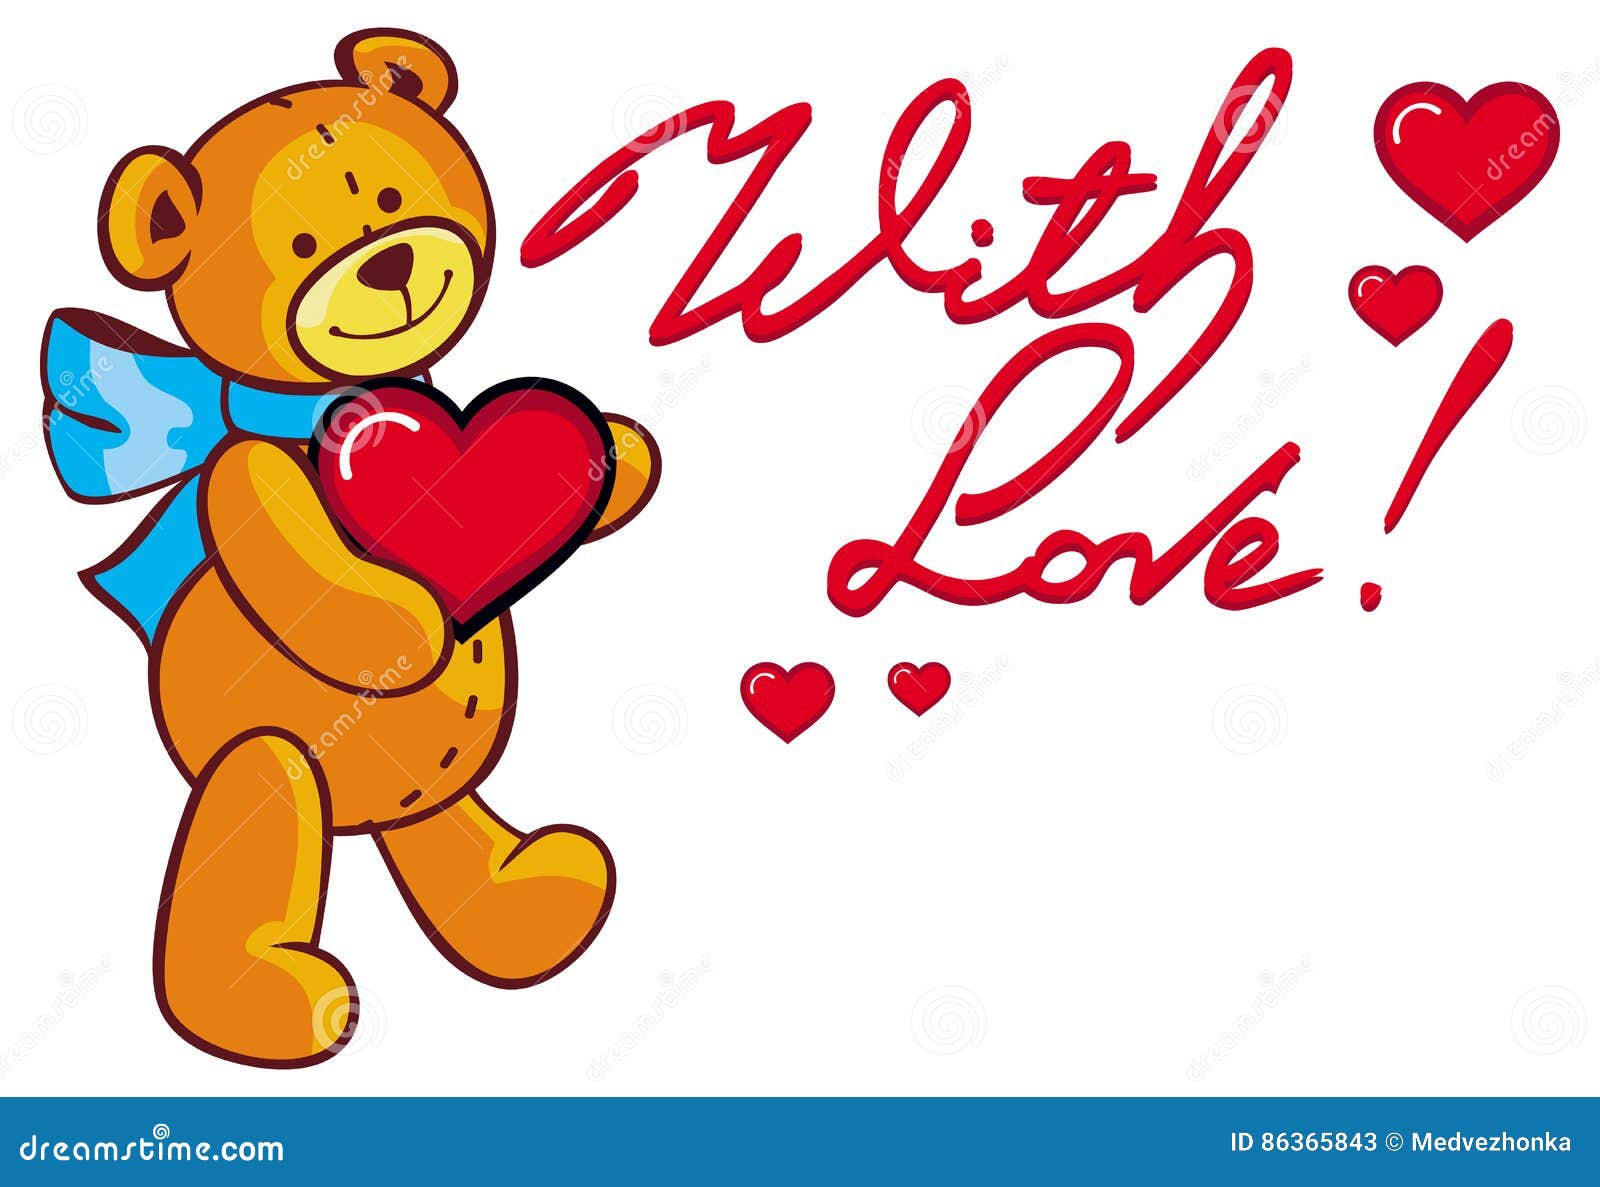 Artistic Written Text with Love! and Cute Teddy Bear Holding R ...